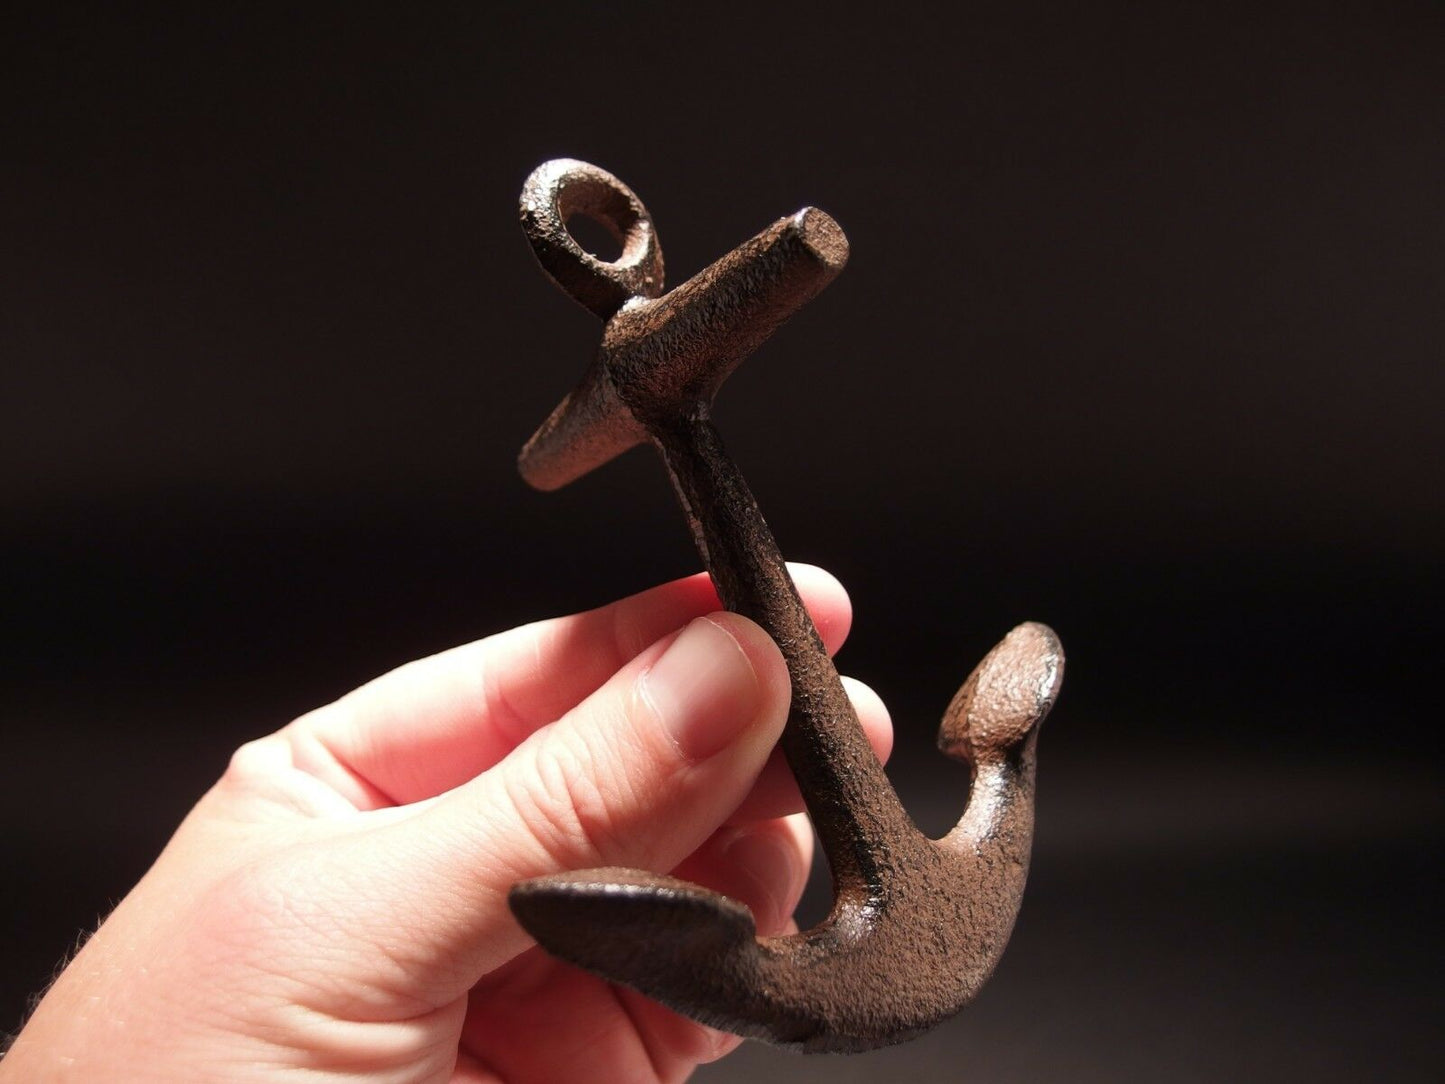 5" Vintage Antique Style Cast Iron Ships Boat Anchor Desk Paperweight - Early Home Decor